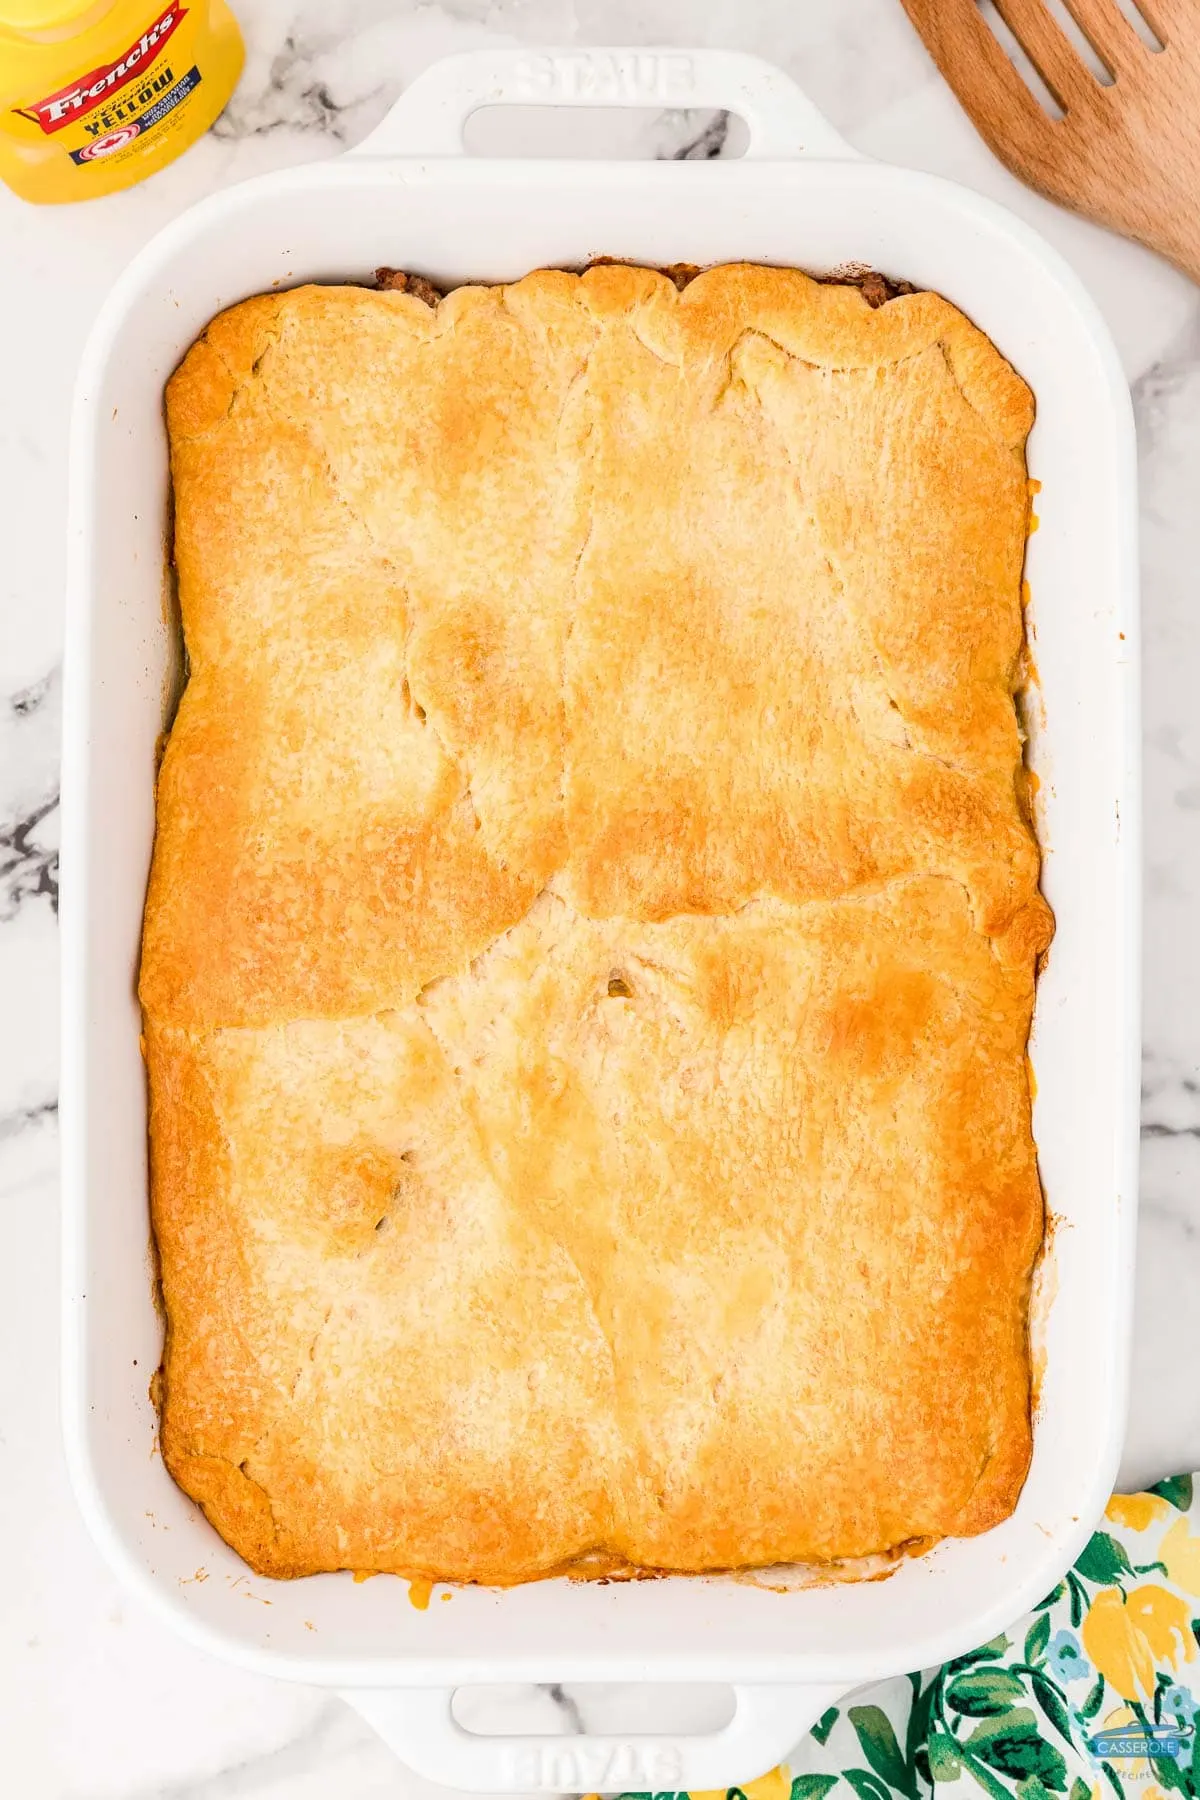 baked bierock casserole in a white dish with a floral napkin on the right